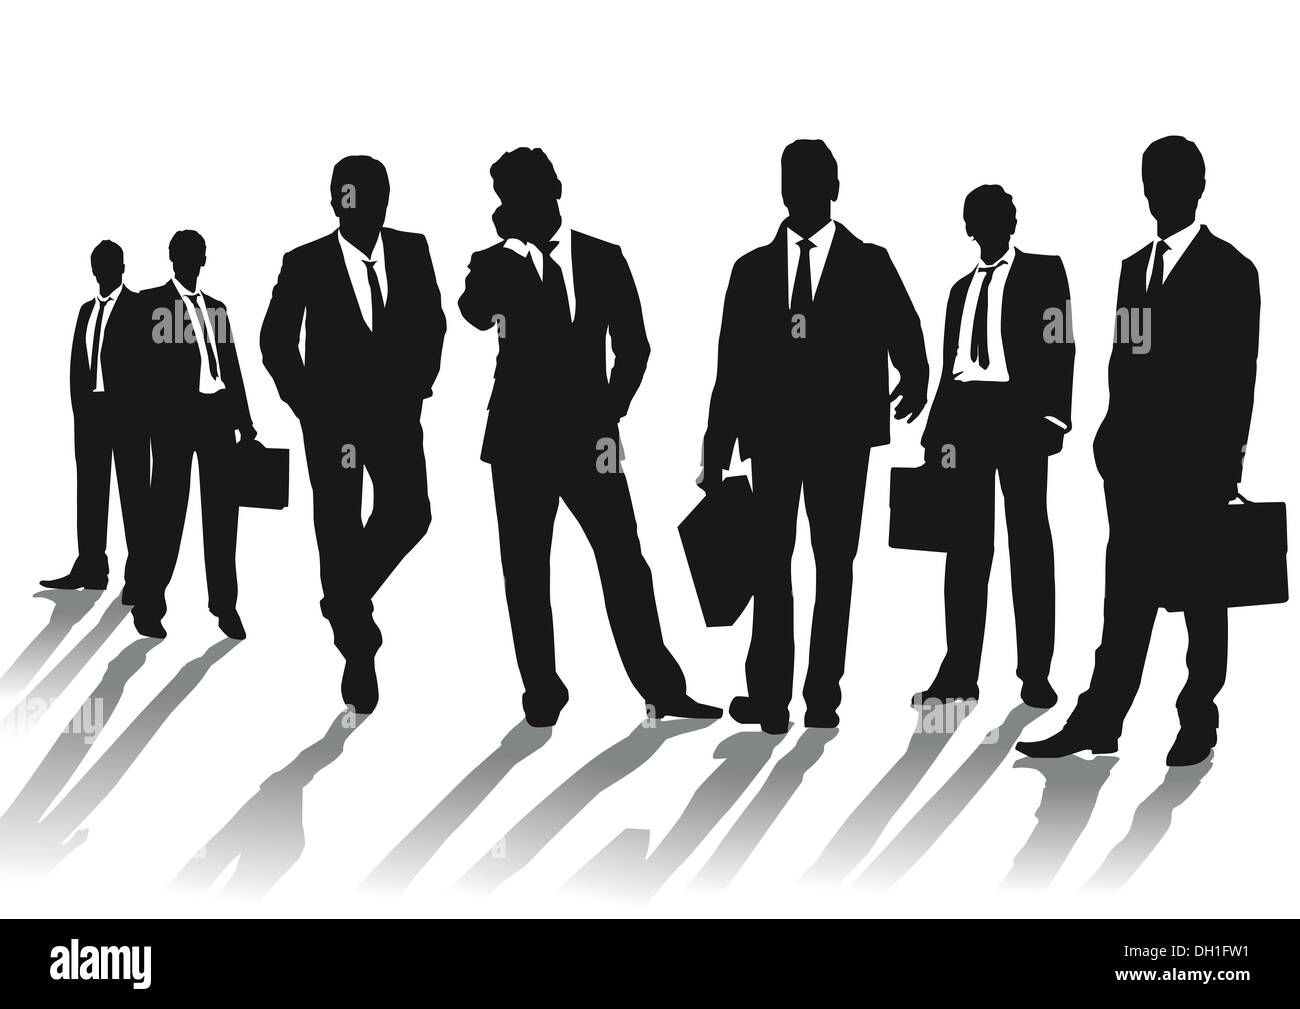 Business people silhouettes Stock Photo